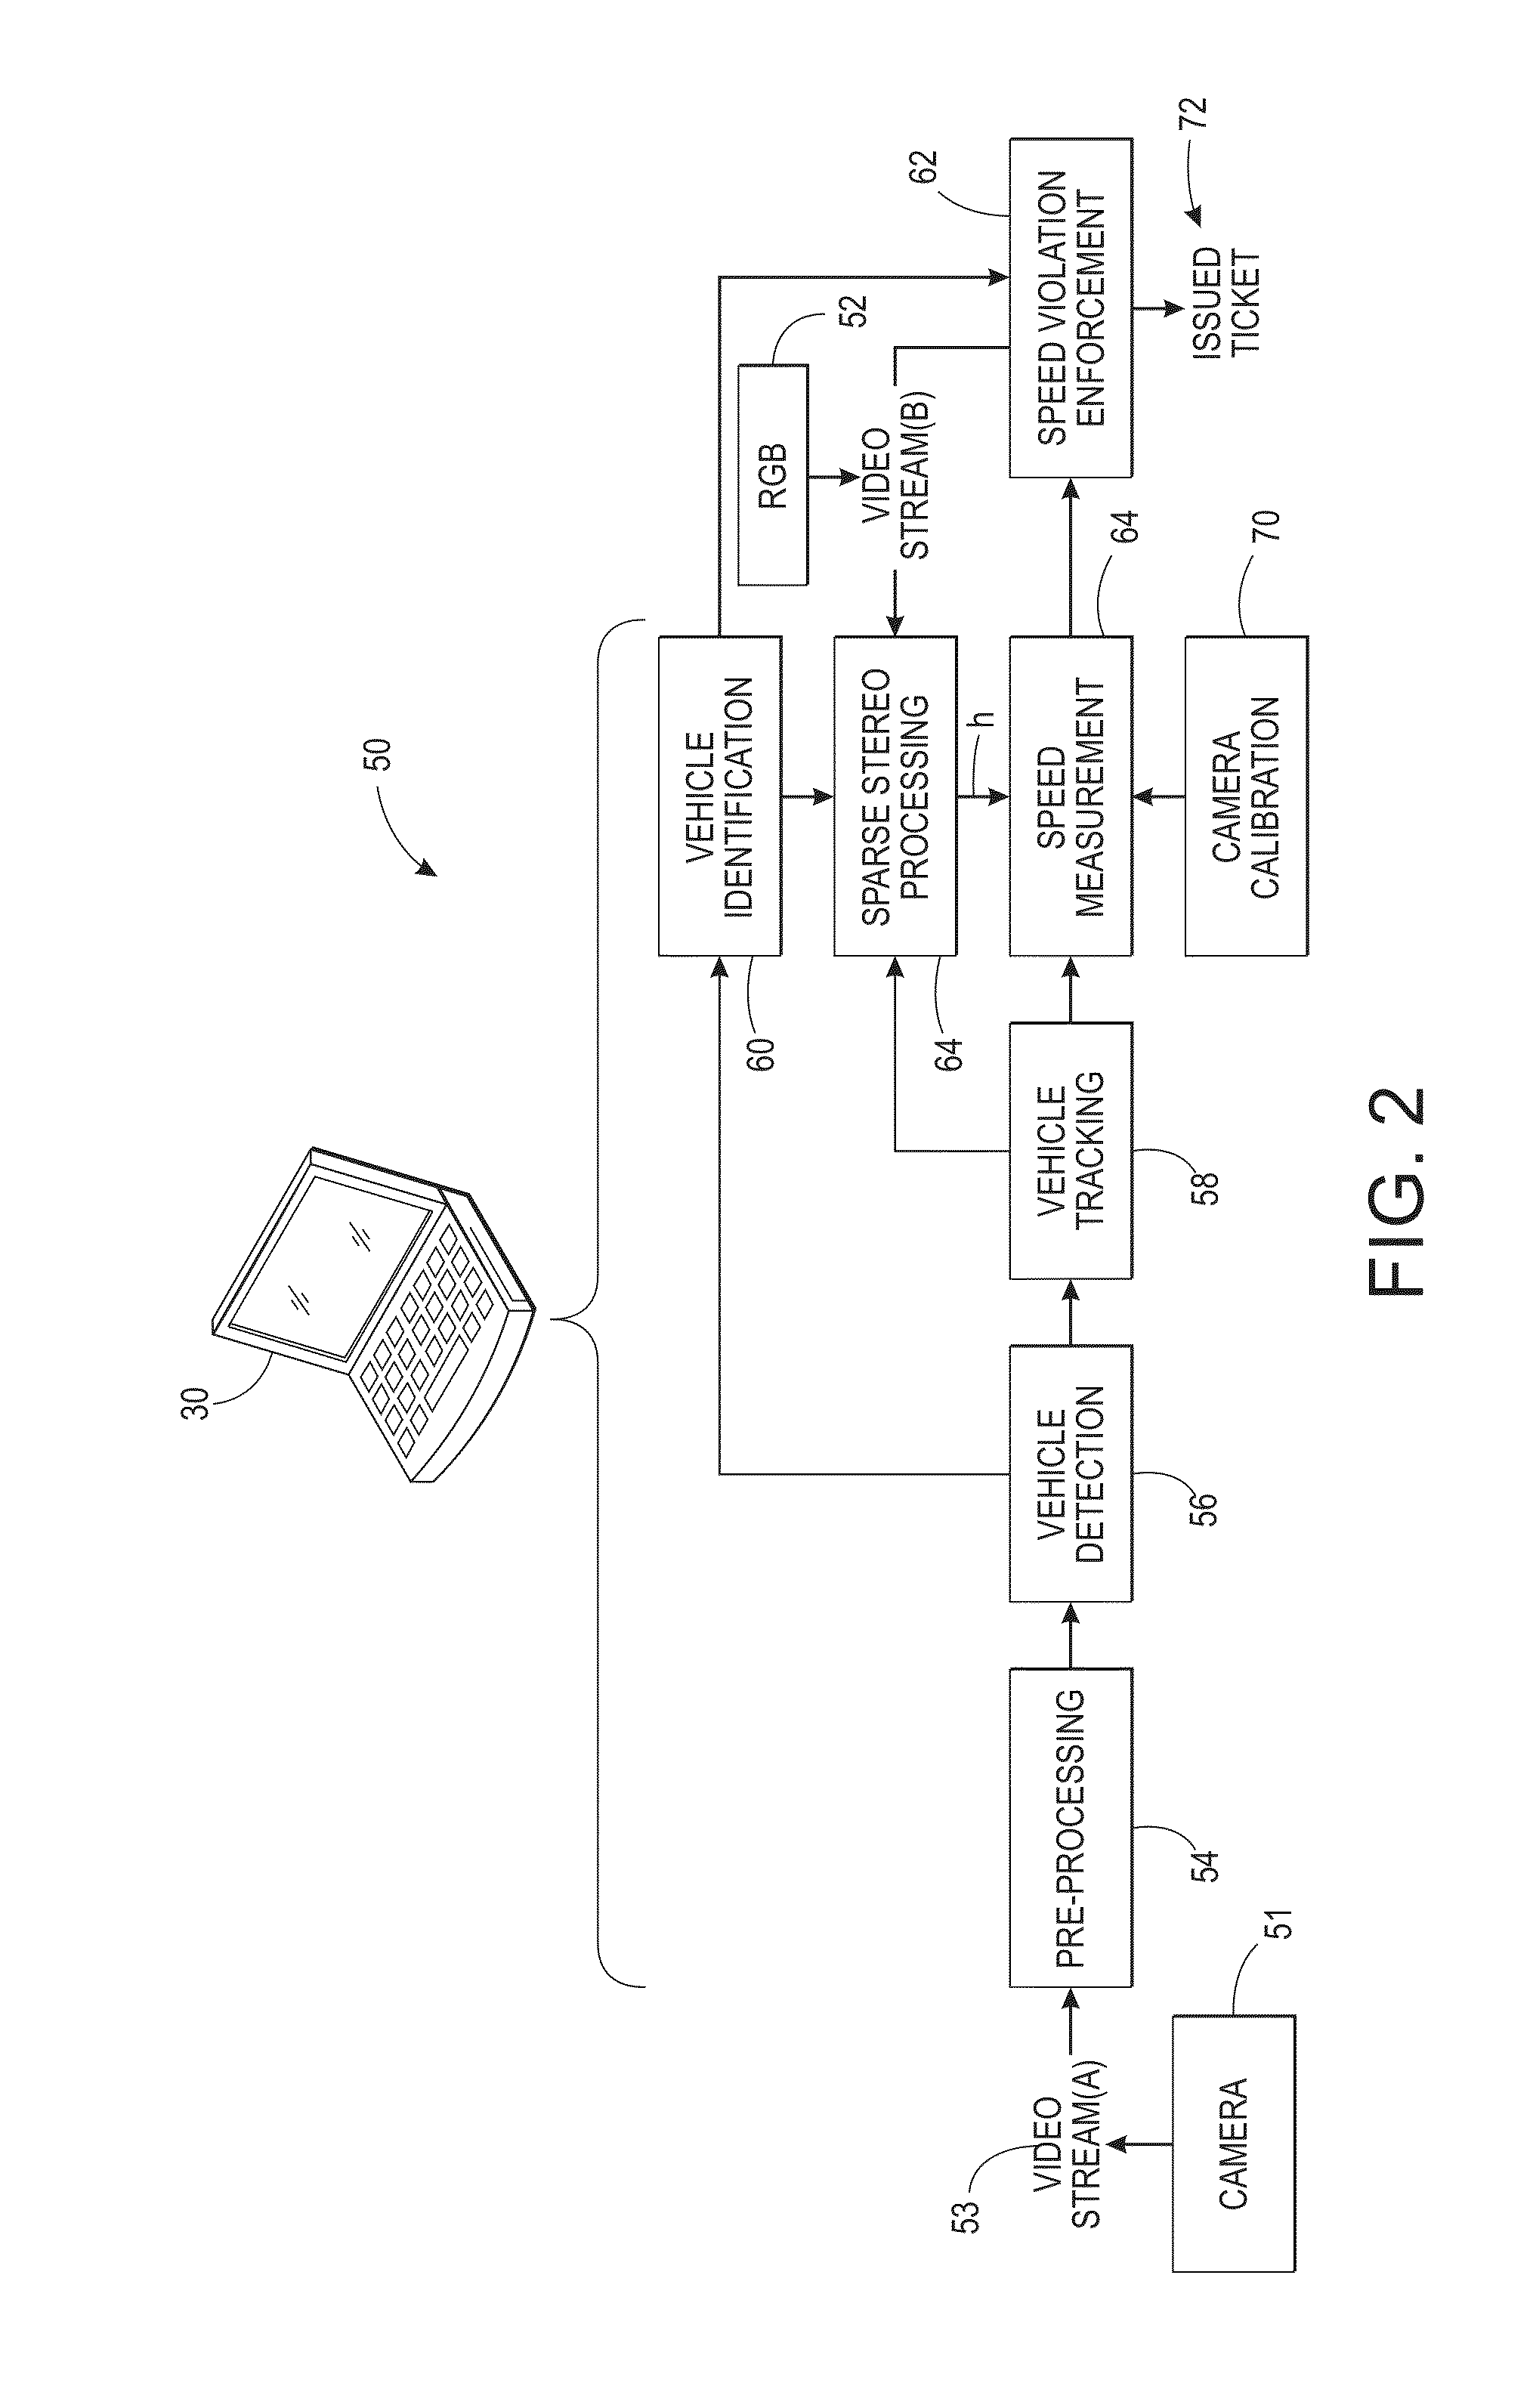 Single camera video-based speed enforcement system with a secondary auxiliary RGB traffic camera